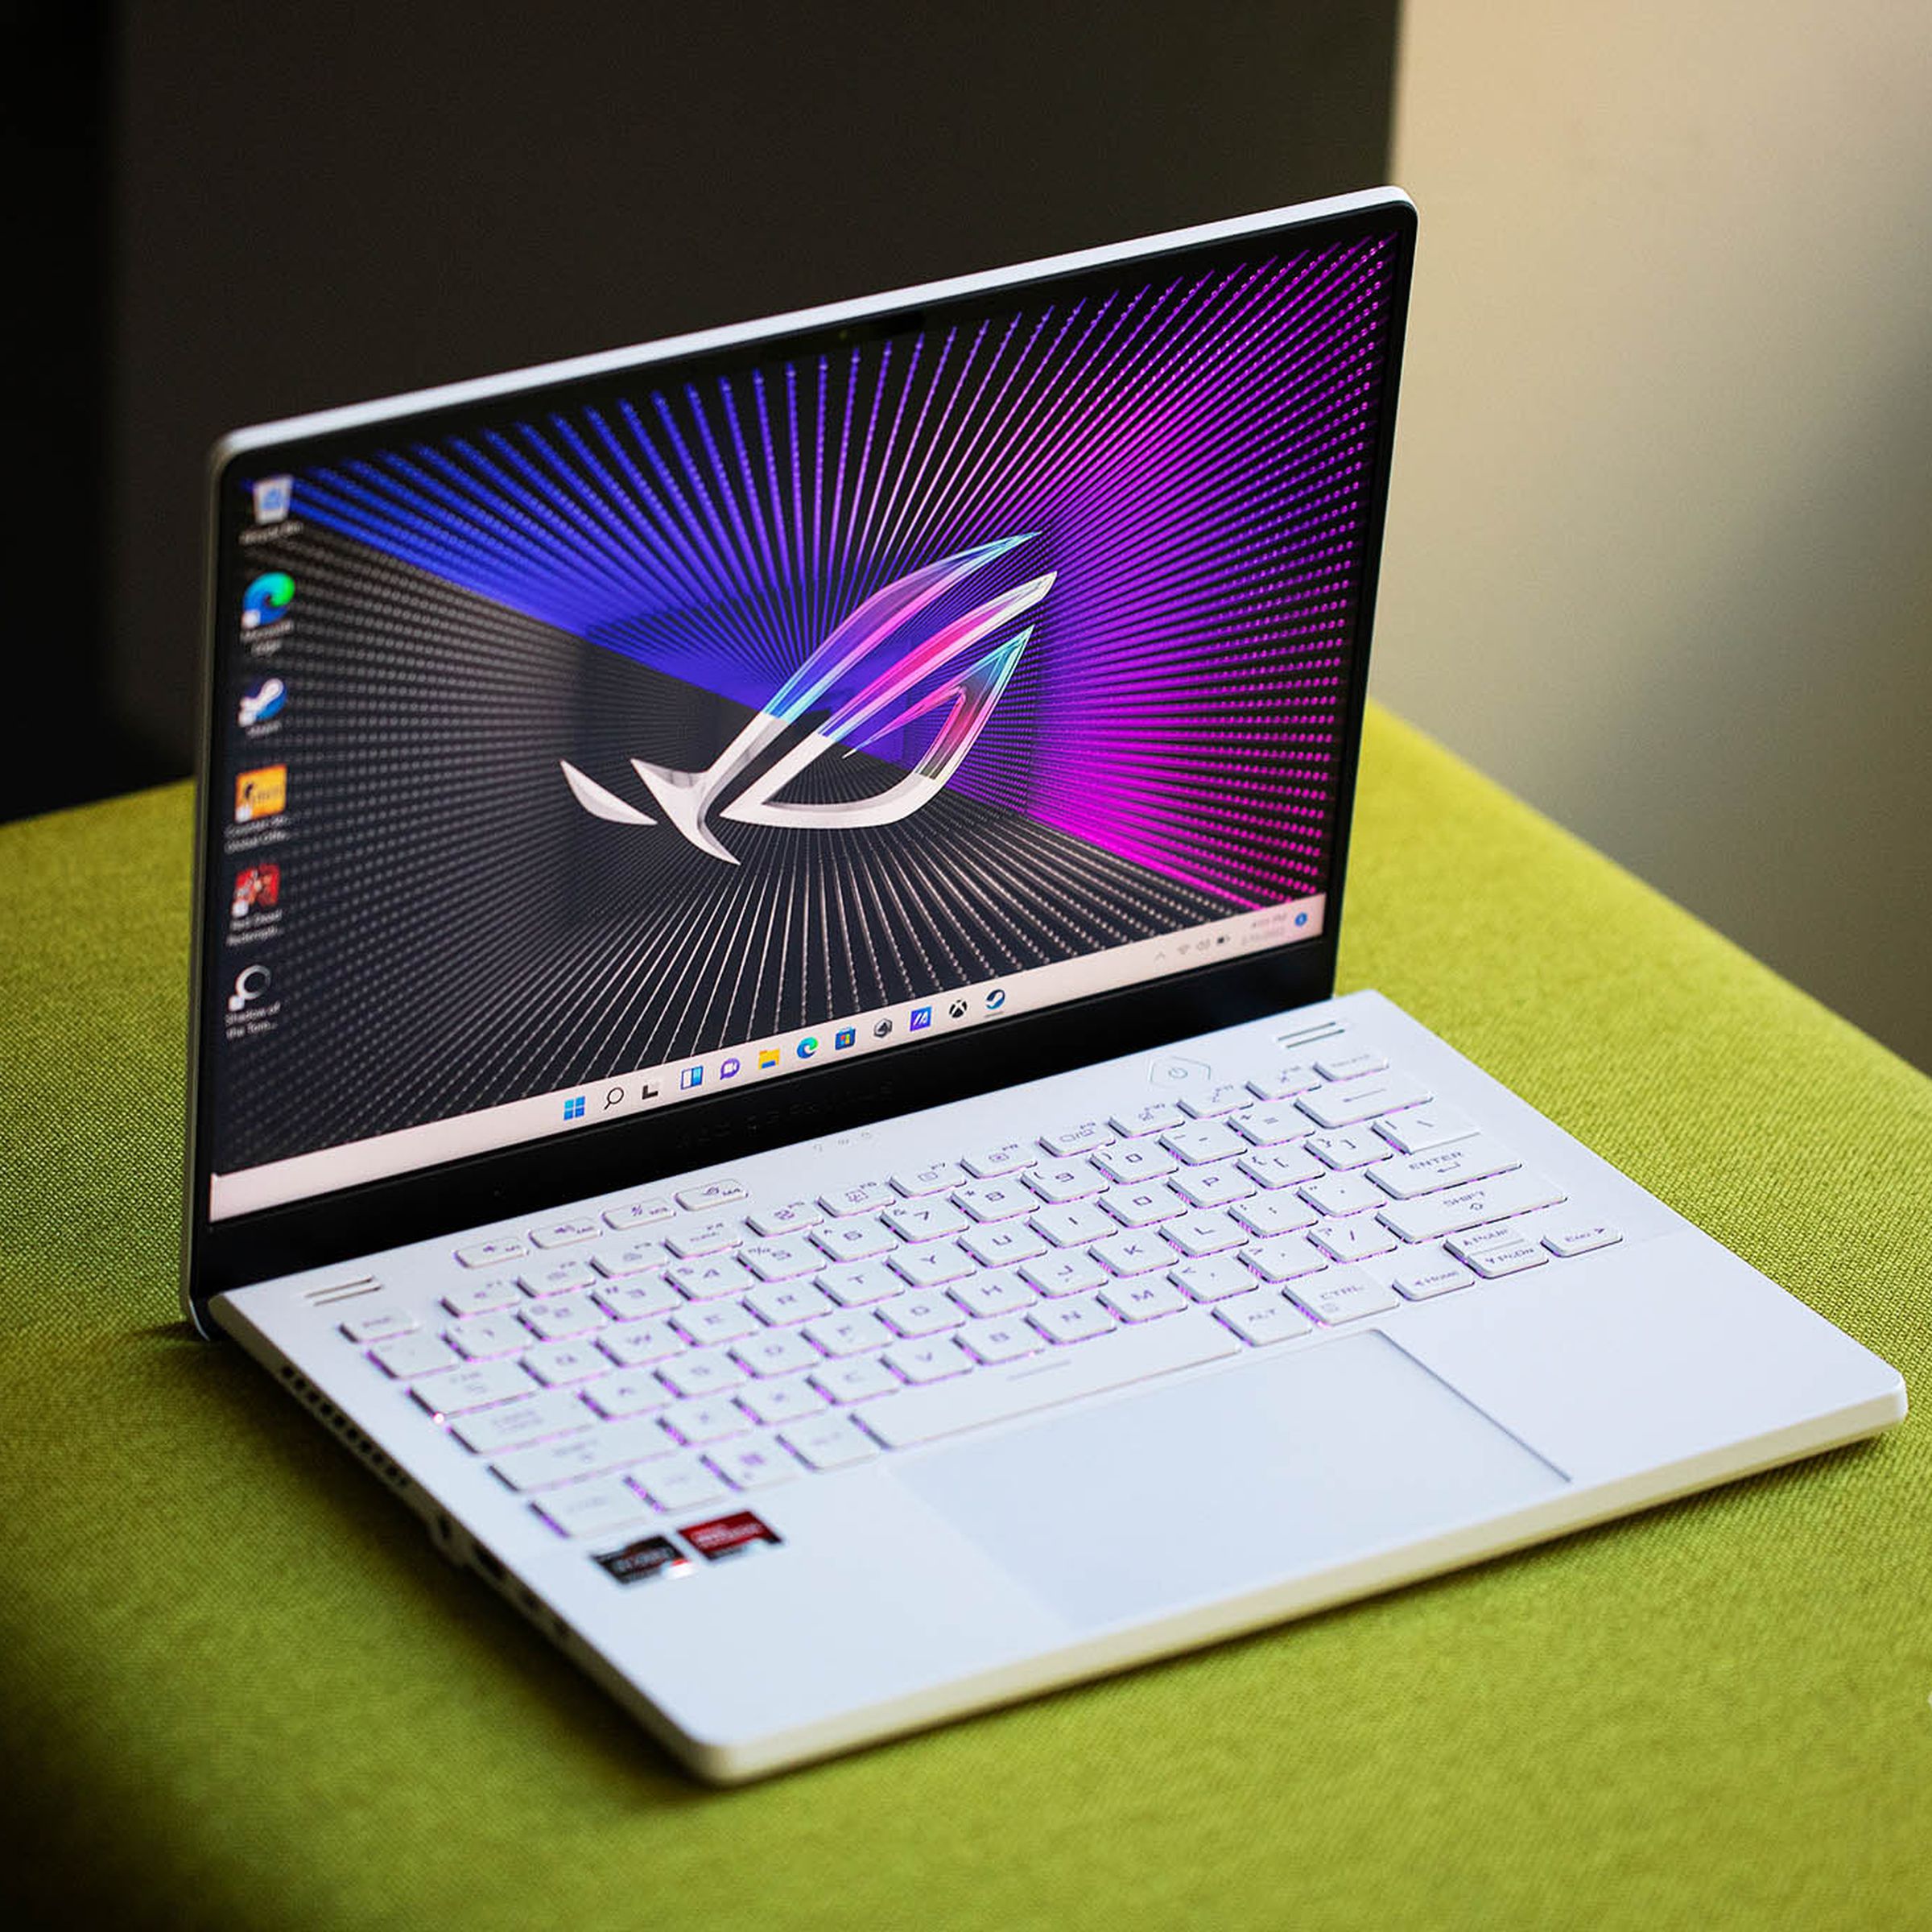 A white Asus thin gaming laptop on a green fabric surface, displaying a big Asus logo on a predominantly purple desktop background